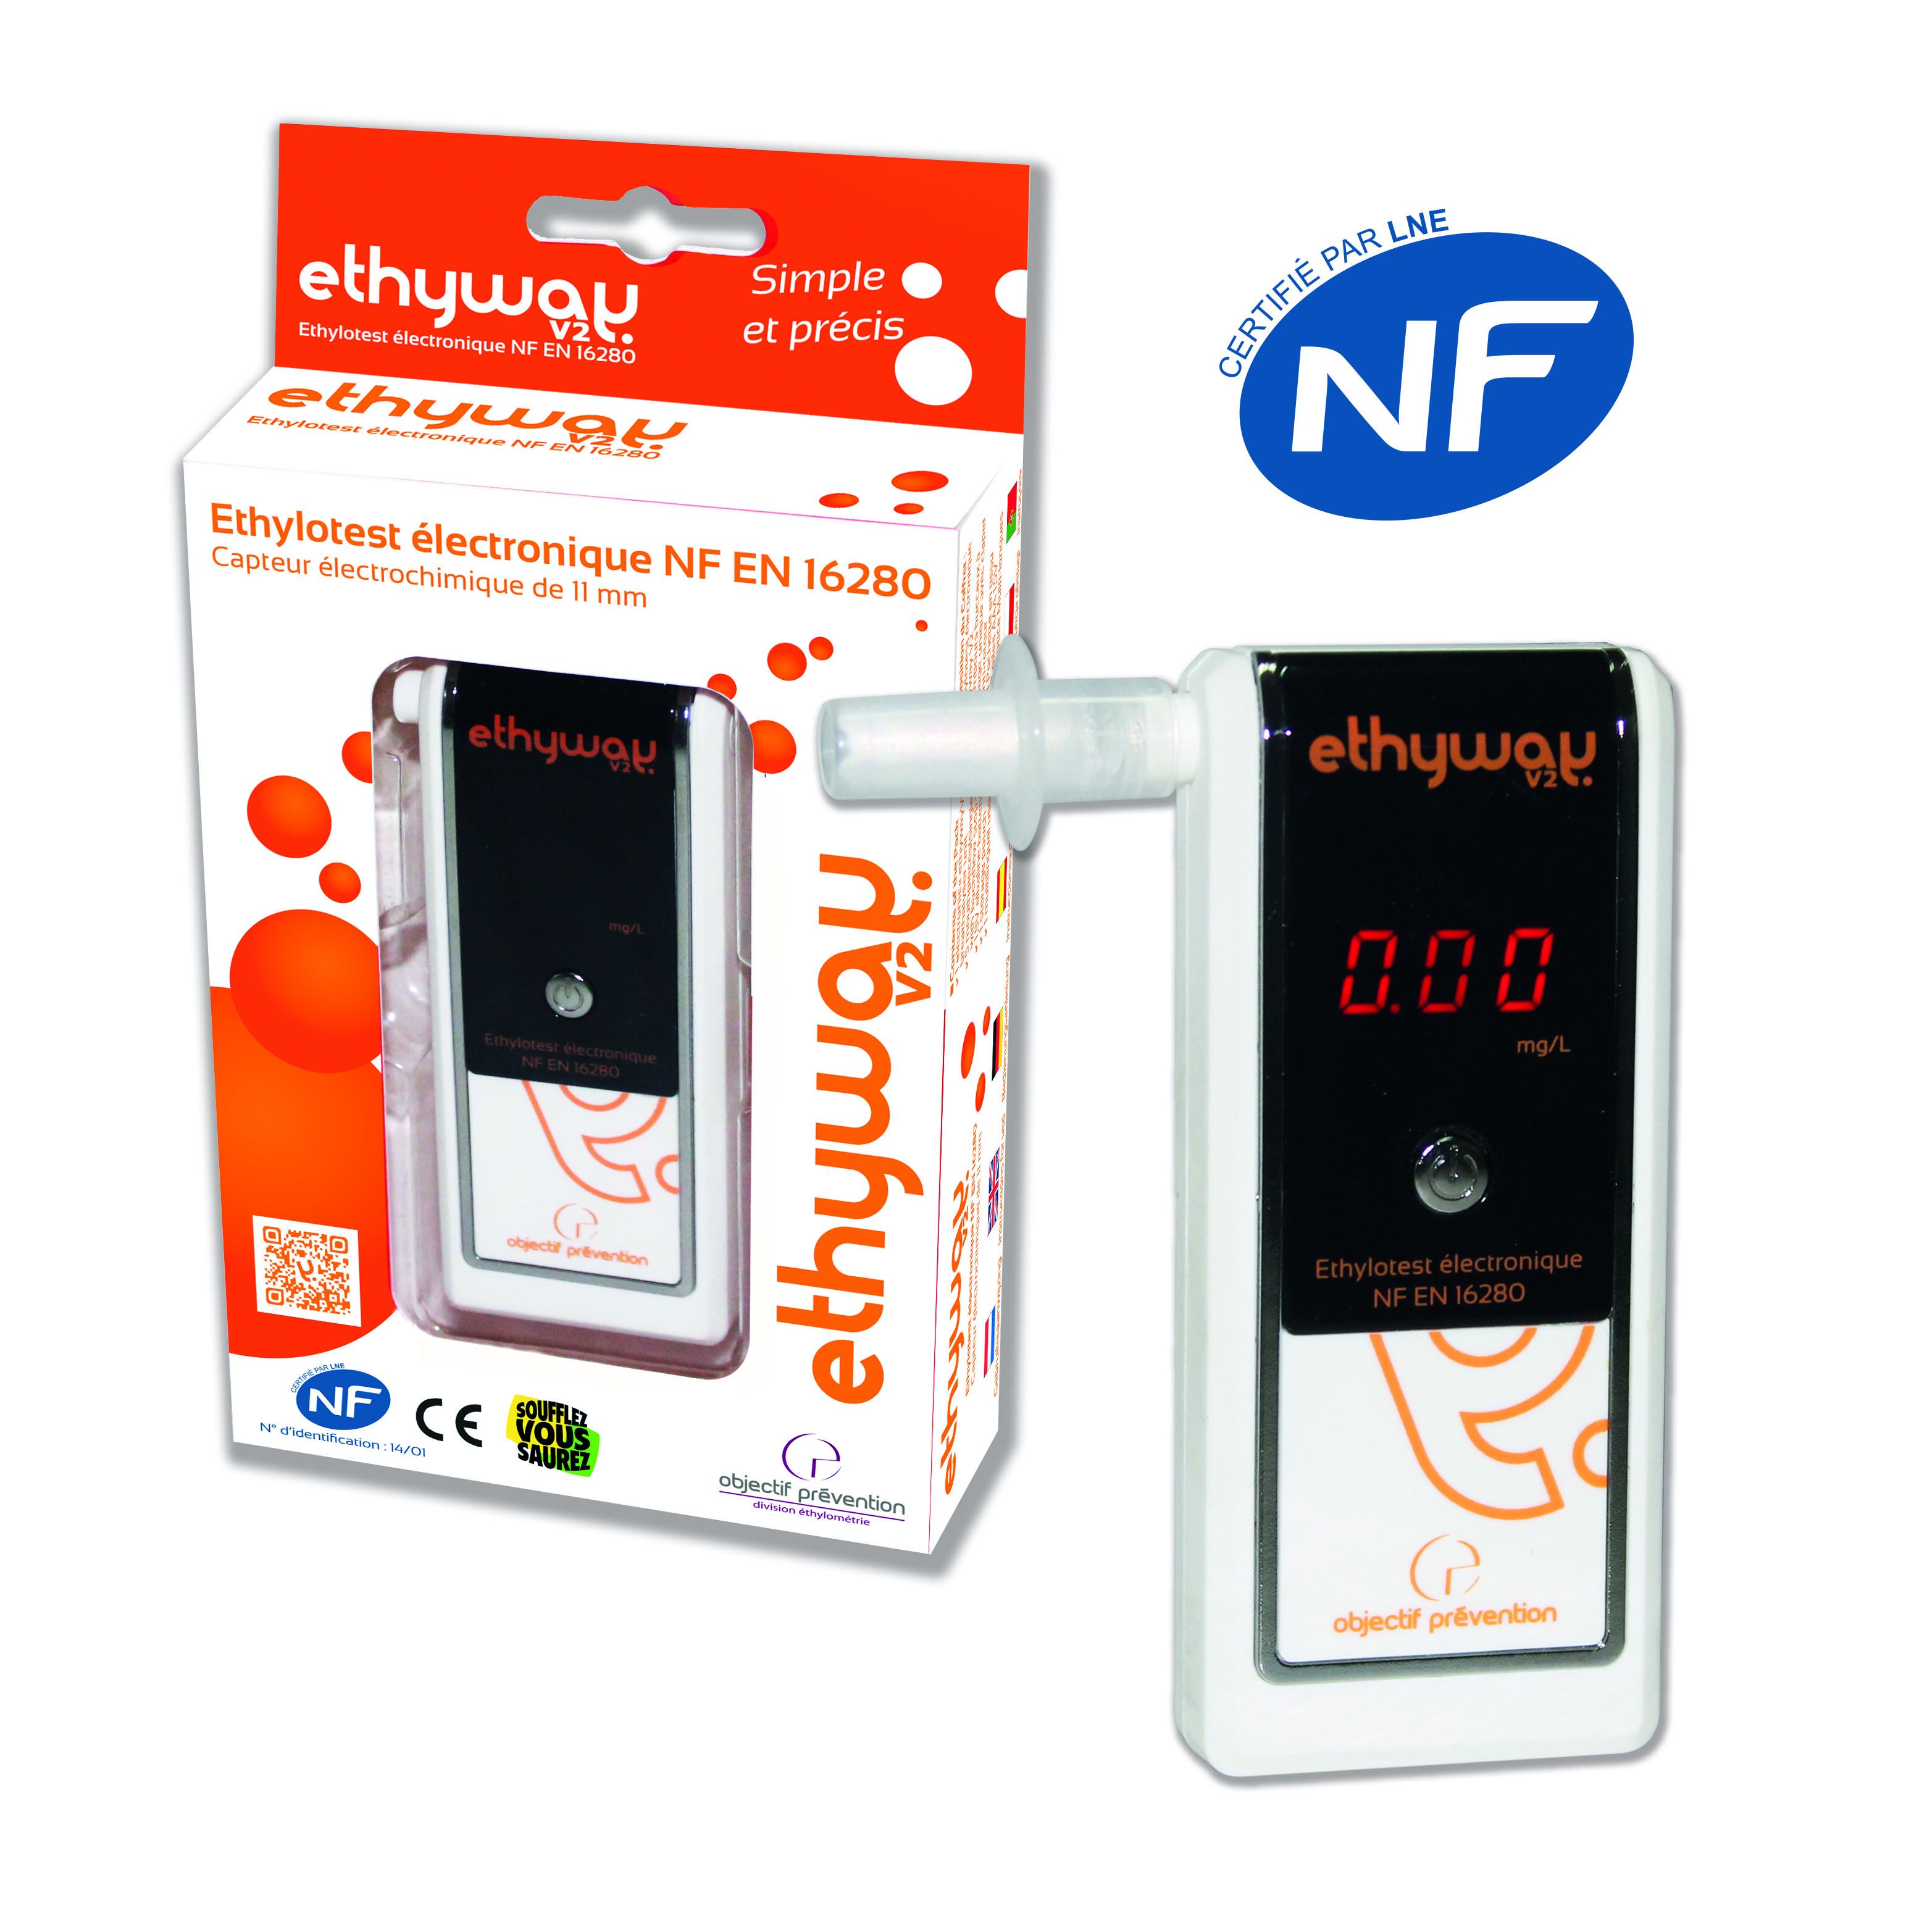 Ethylotest Electronique Nf pas cher - Achat neuf et occasion